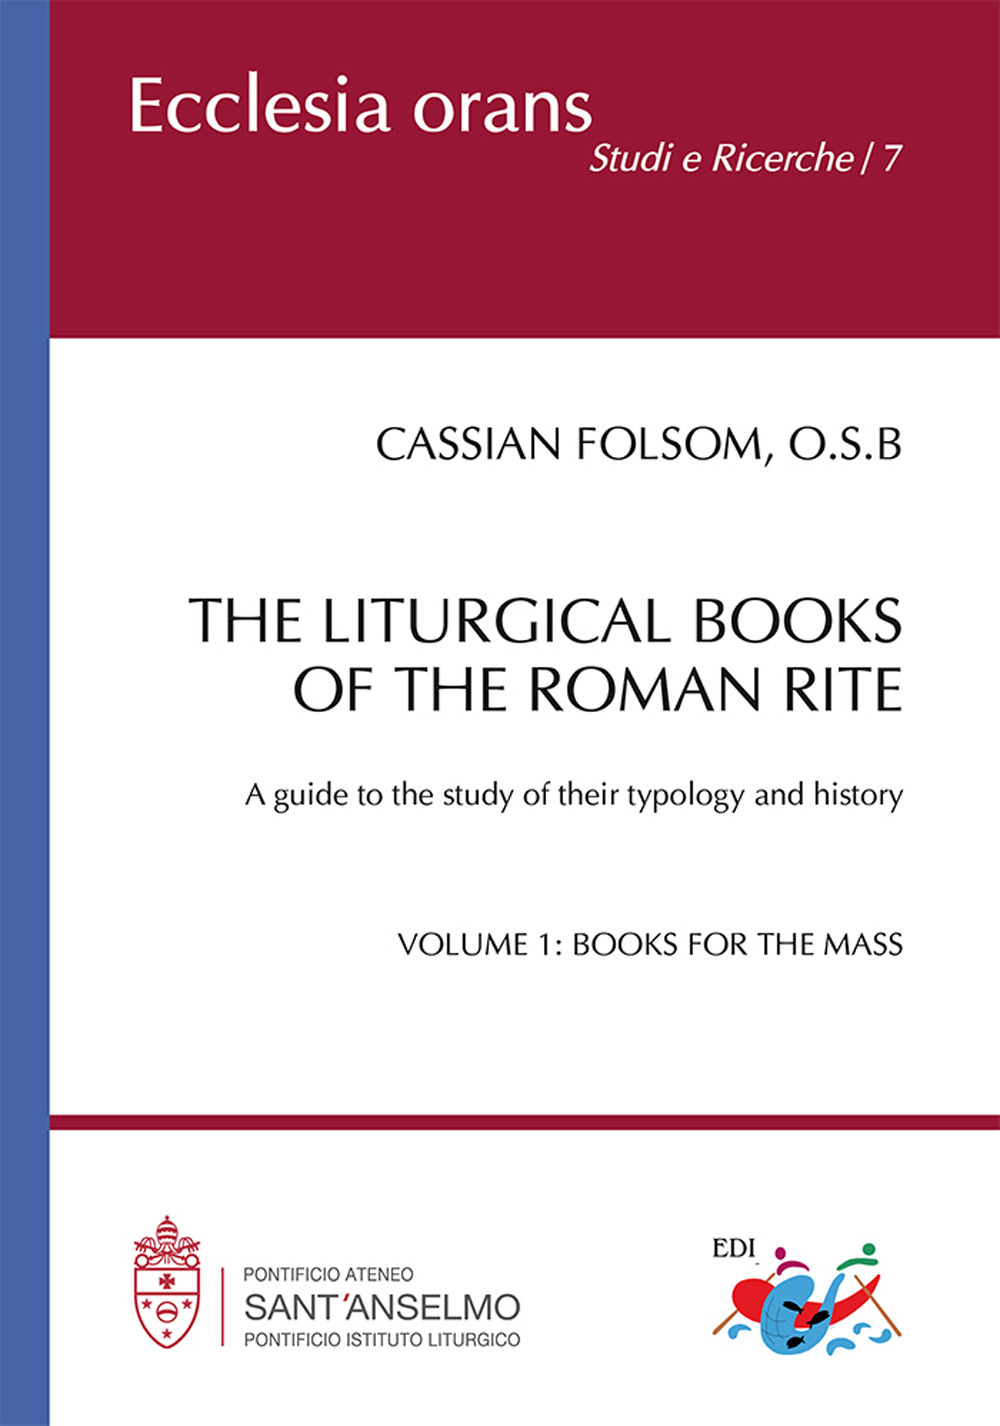 The liturgical books of the roman rite. A guide to the study of their typology and history. Vol. 1: Books for the Mass